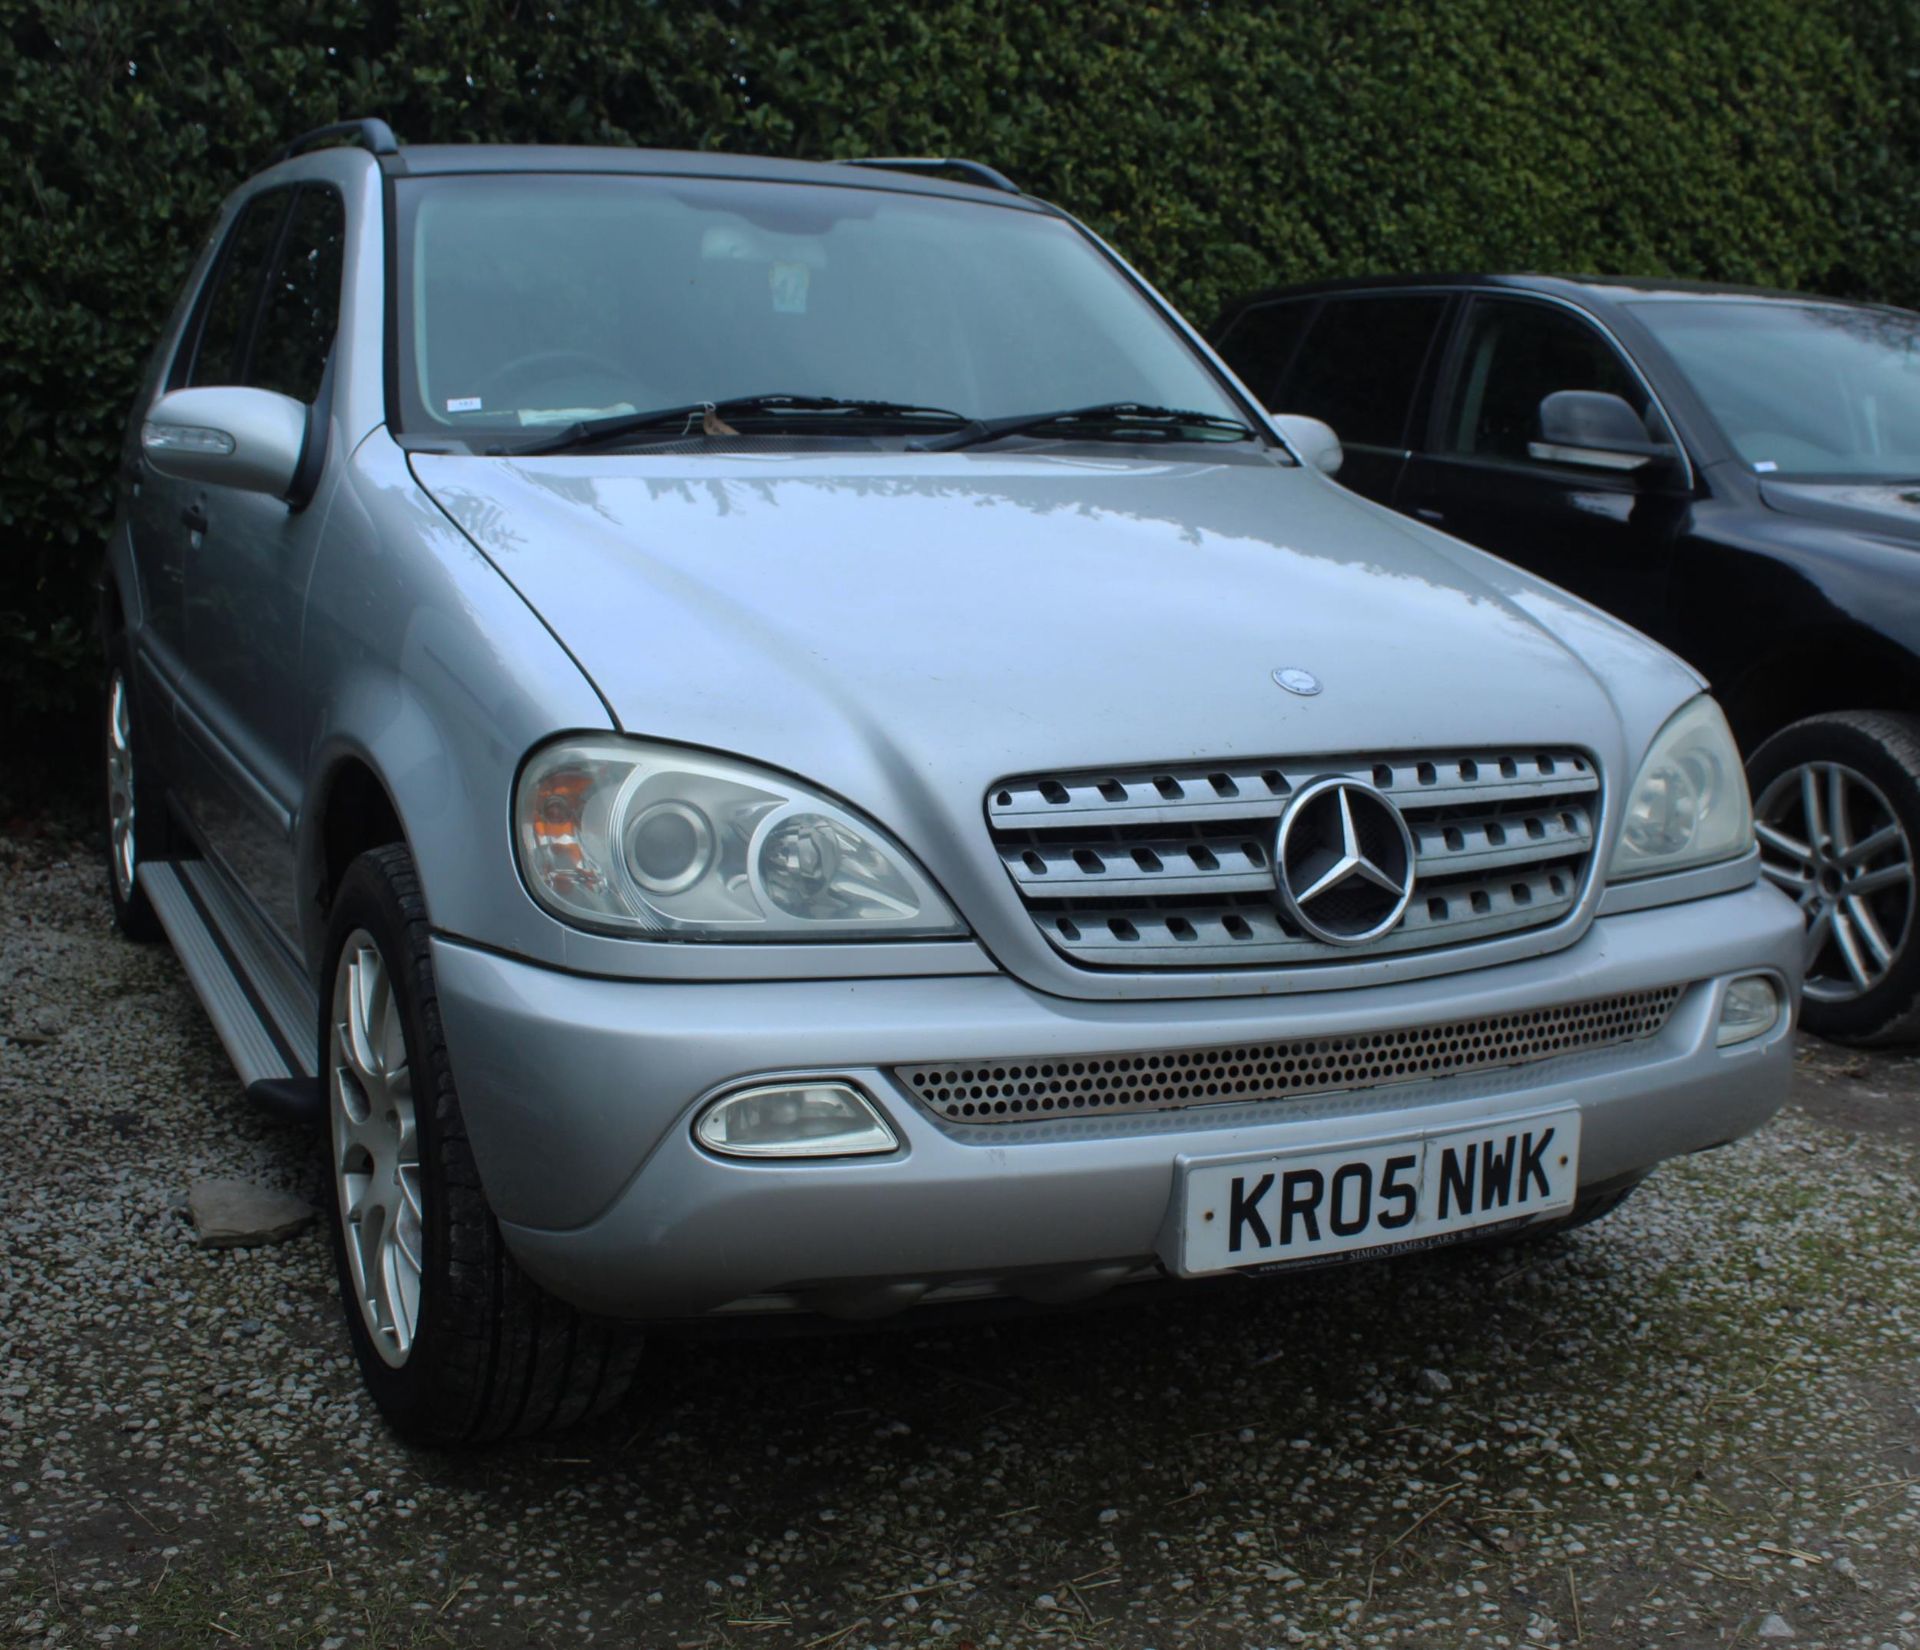 MERCEDES ML350 AUTOMATIC KR05NWK FIRST REG 2005 FULL LEATHER HEATED SEATS TVS IN THE BACK FULLY